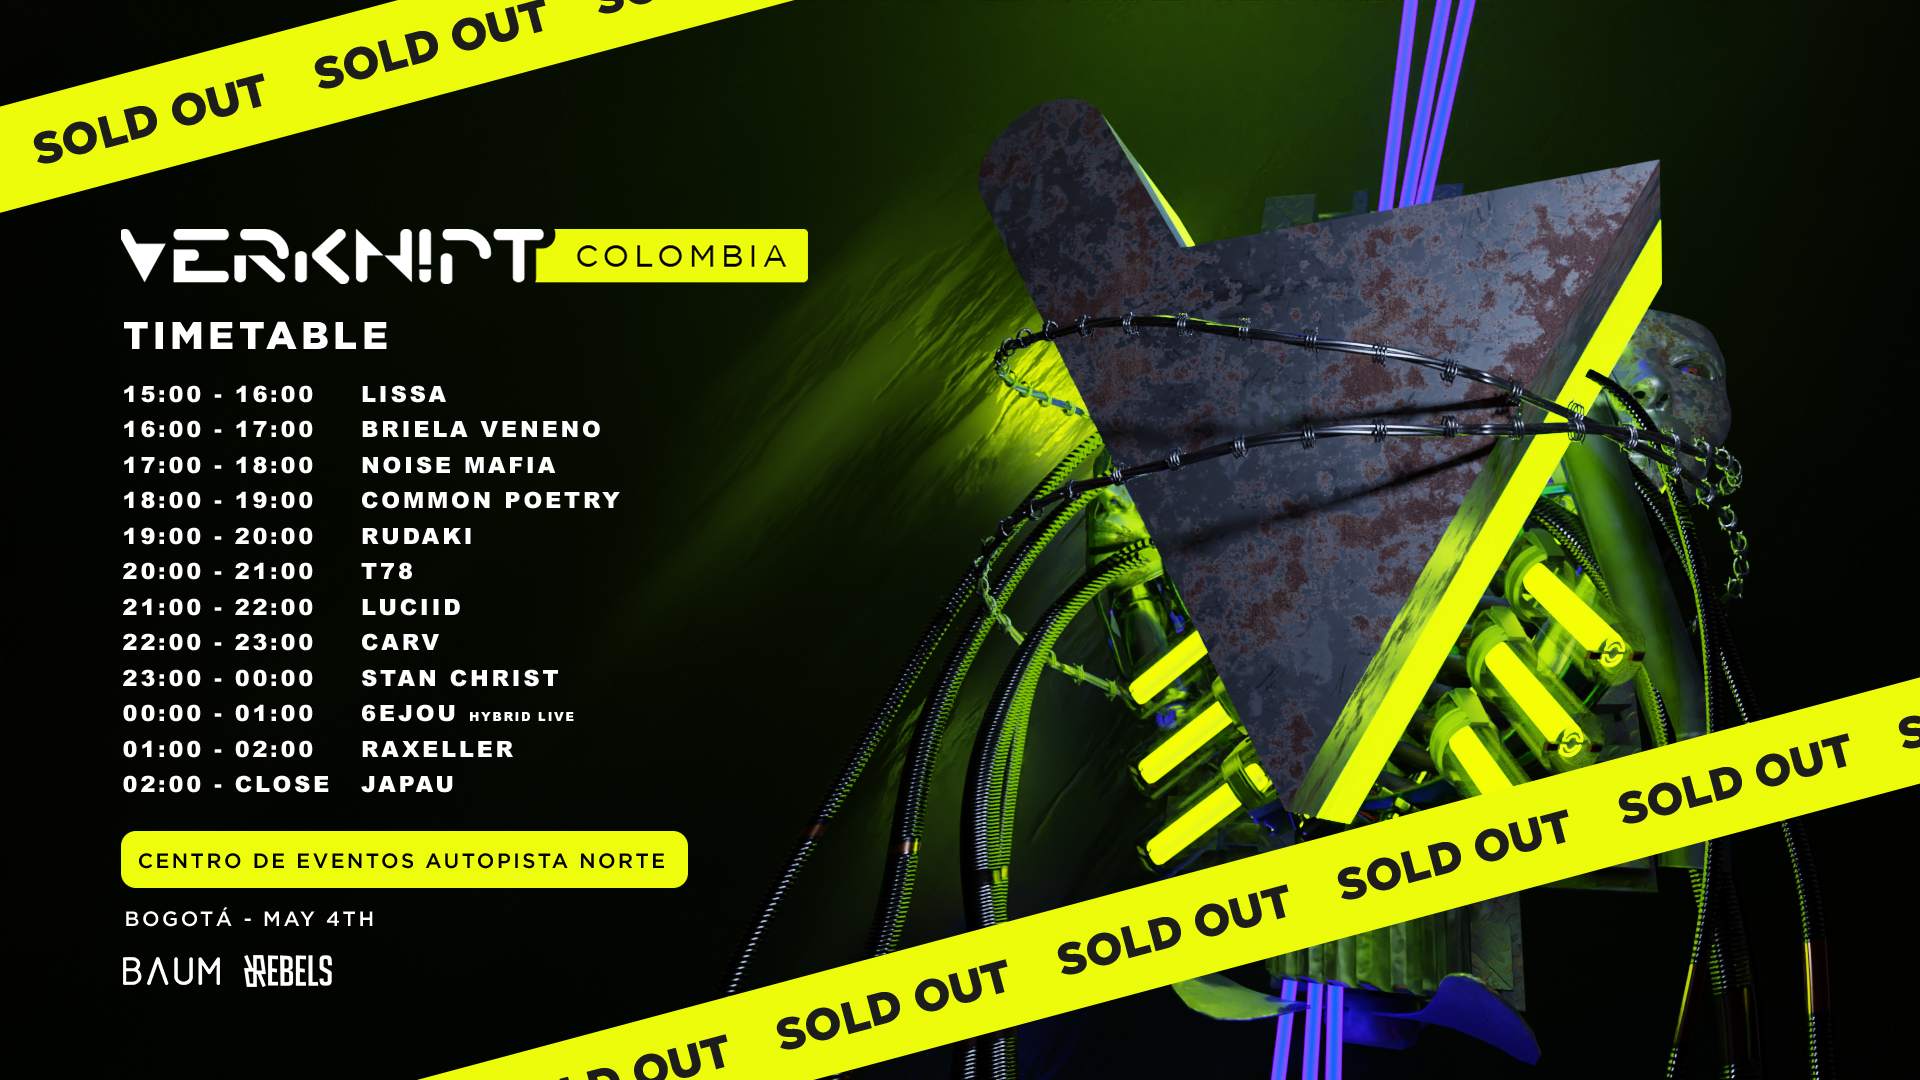 VERKNIPT Colombia - Bogotá - May 4th - SOLD OUT - Página frontal